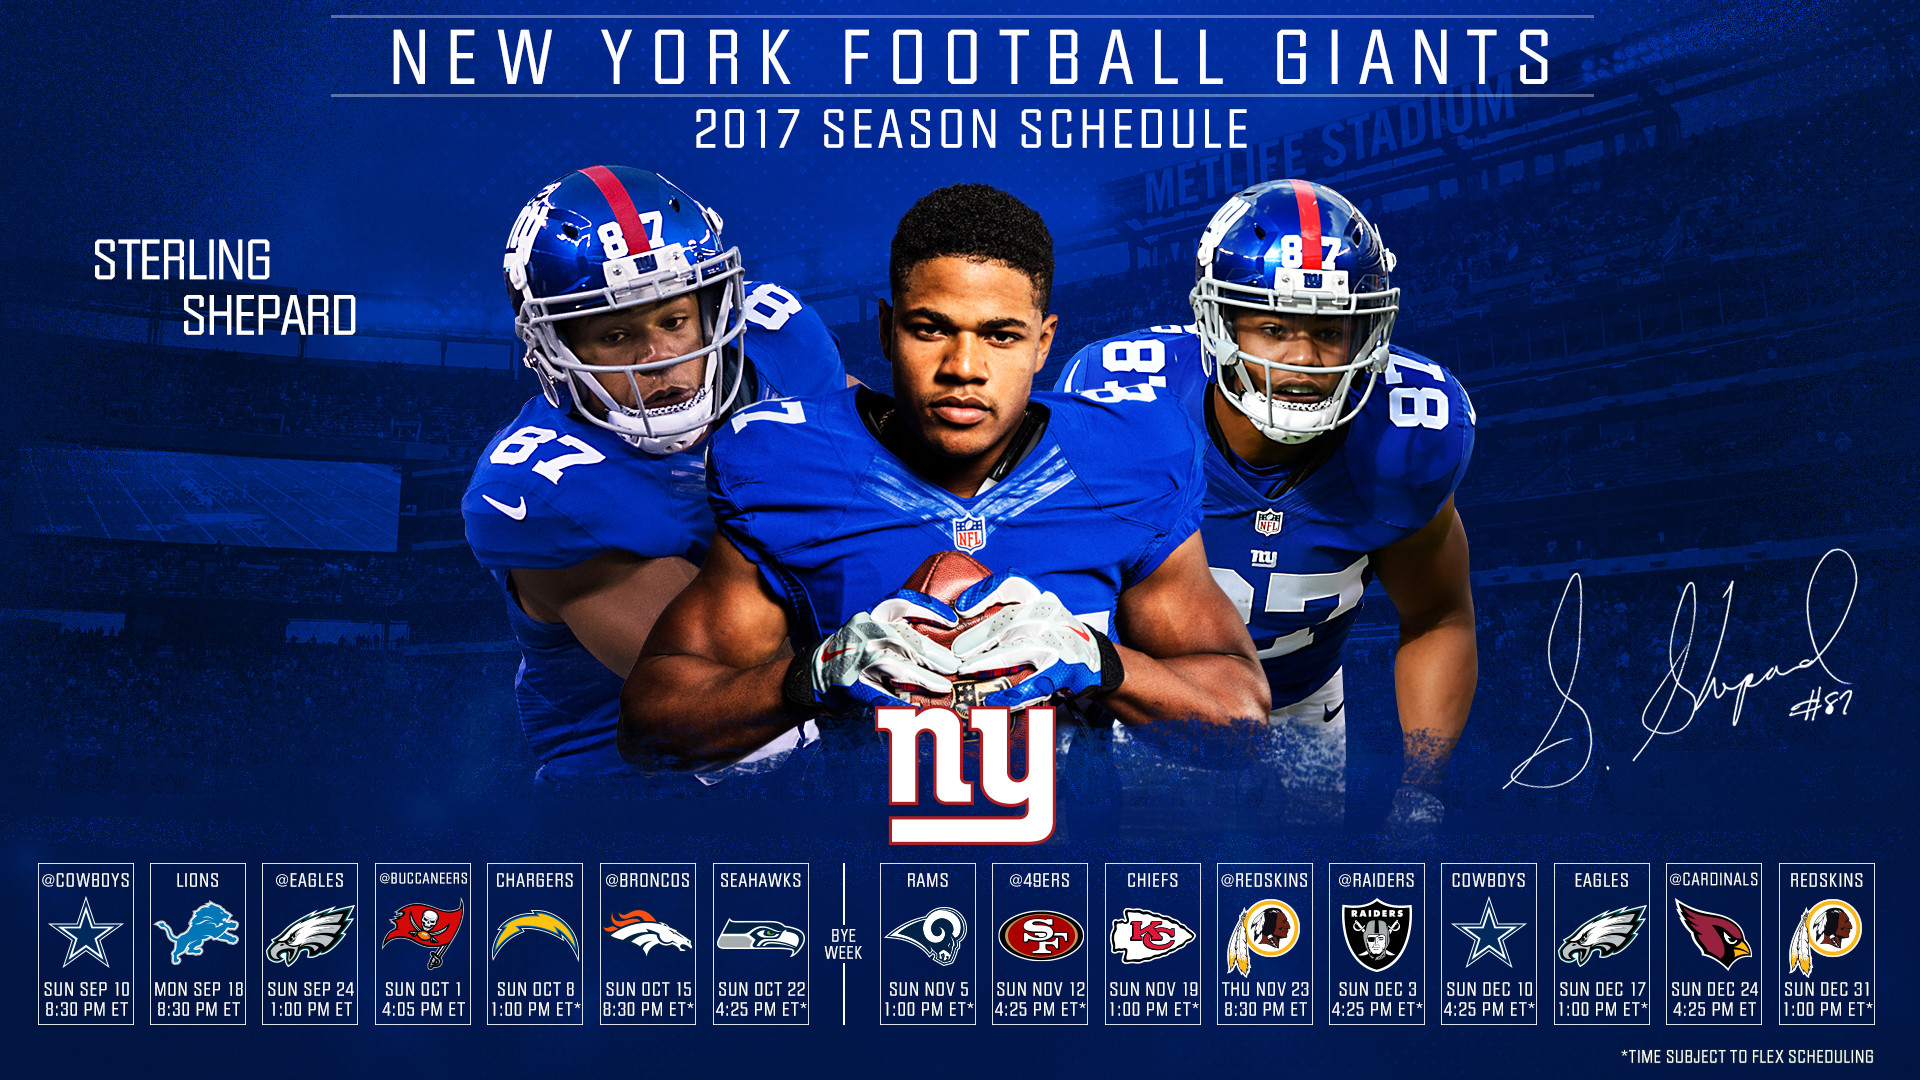 Click one of the thumbnails below to download the New York Giants 2017 schedule desktop wallpaper. For desktop wallpapers, right click on the image and other